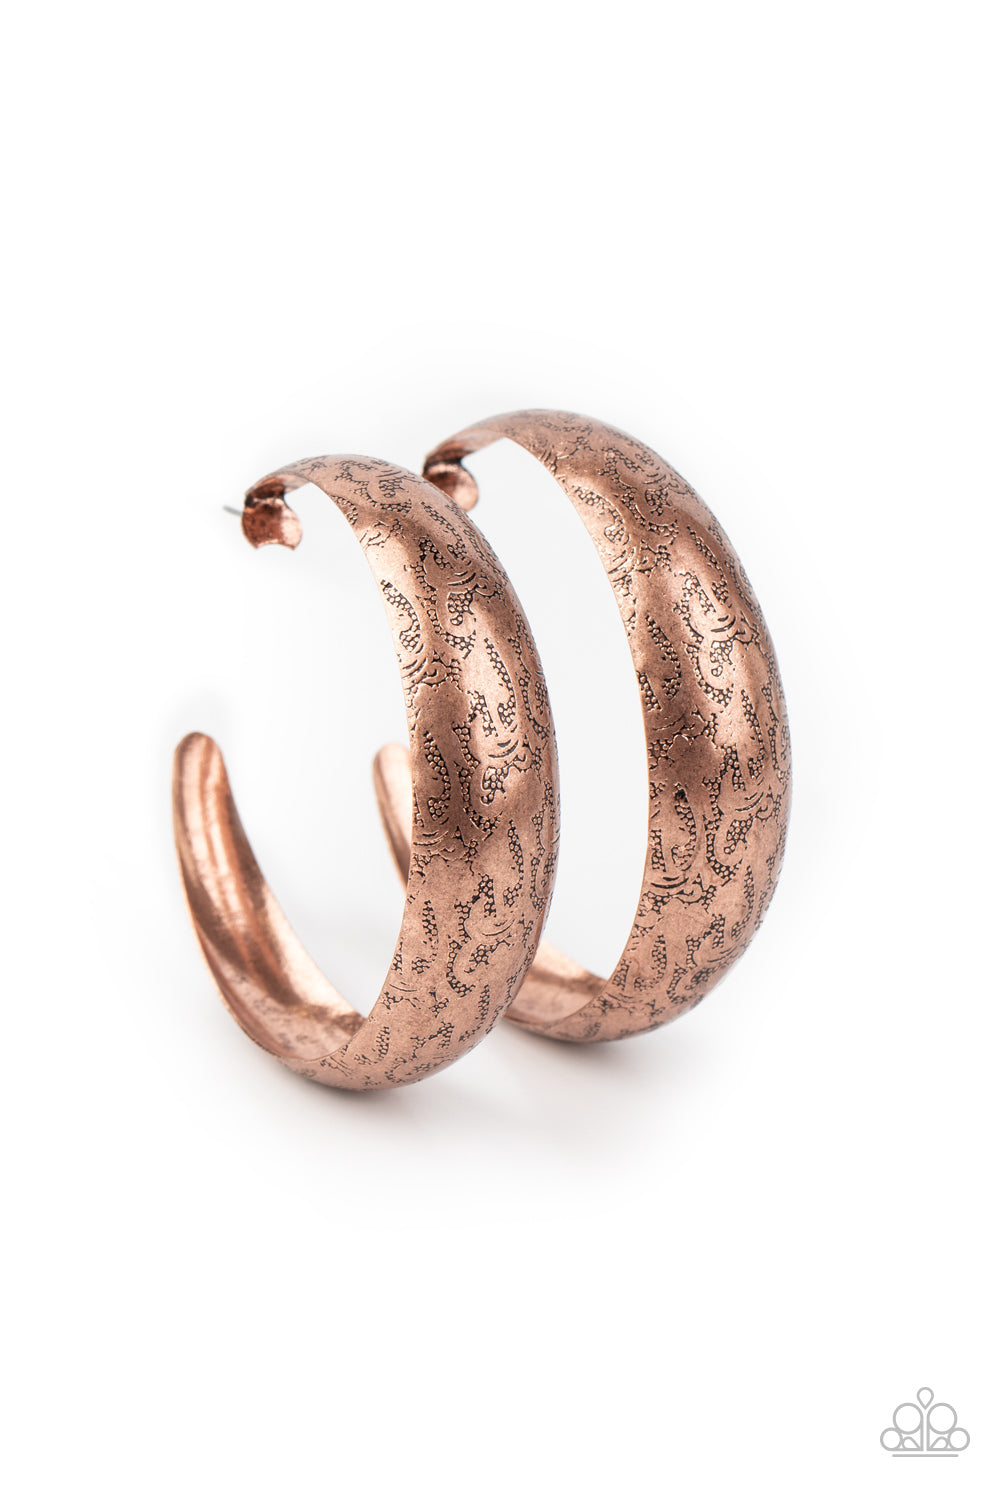 Delicately hammered in studded-like patterns, an oversized antiqued copper hoop boldly curls around the ear for a whimsically rustic look. Earring attaches to a standard post fitting. Hoop measures approximately 2